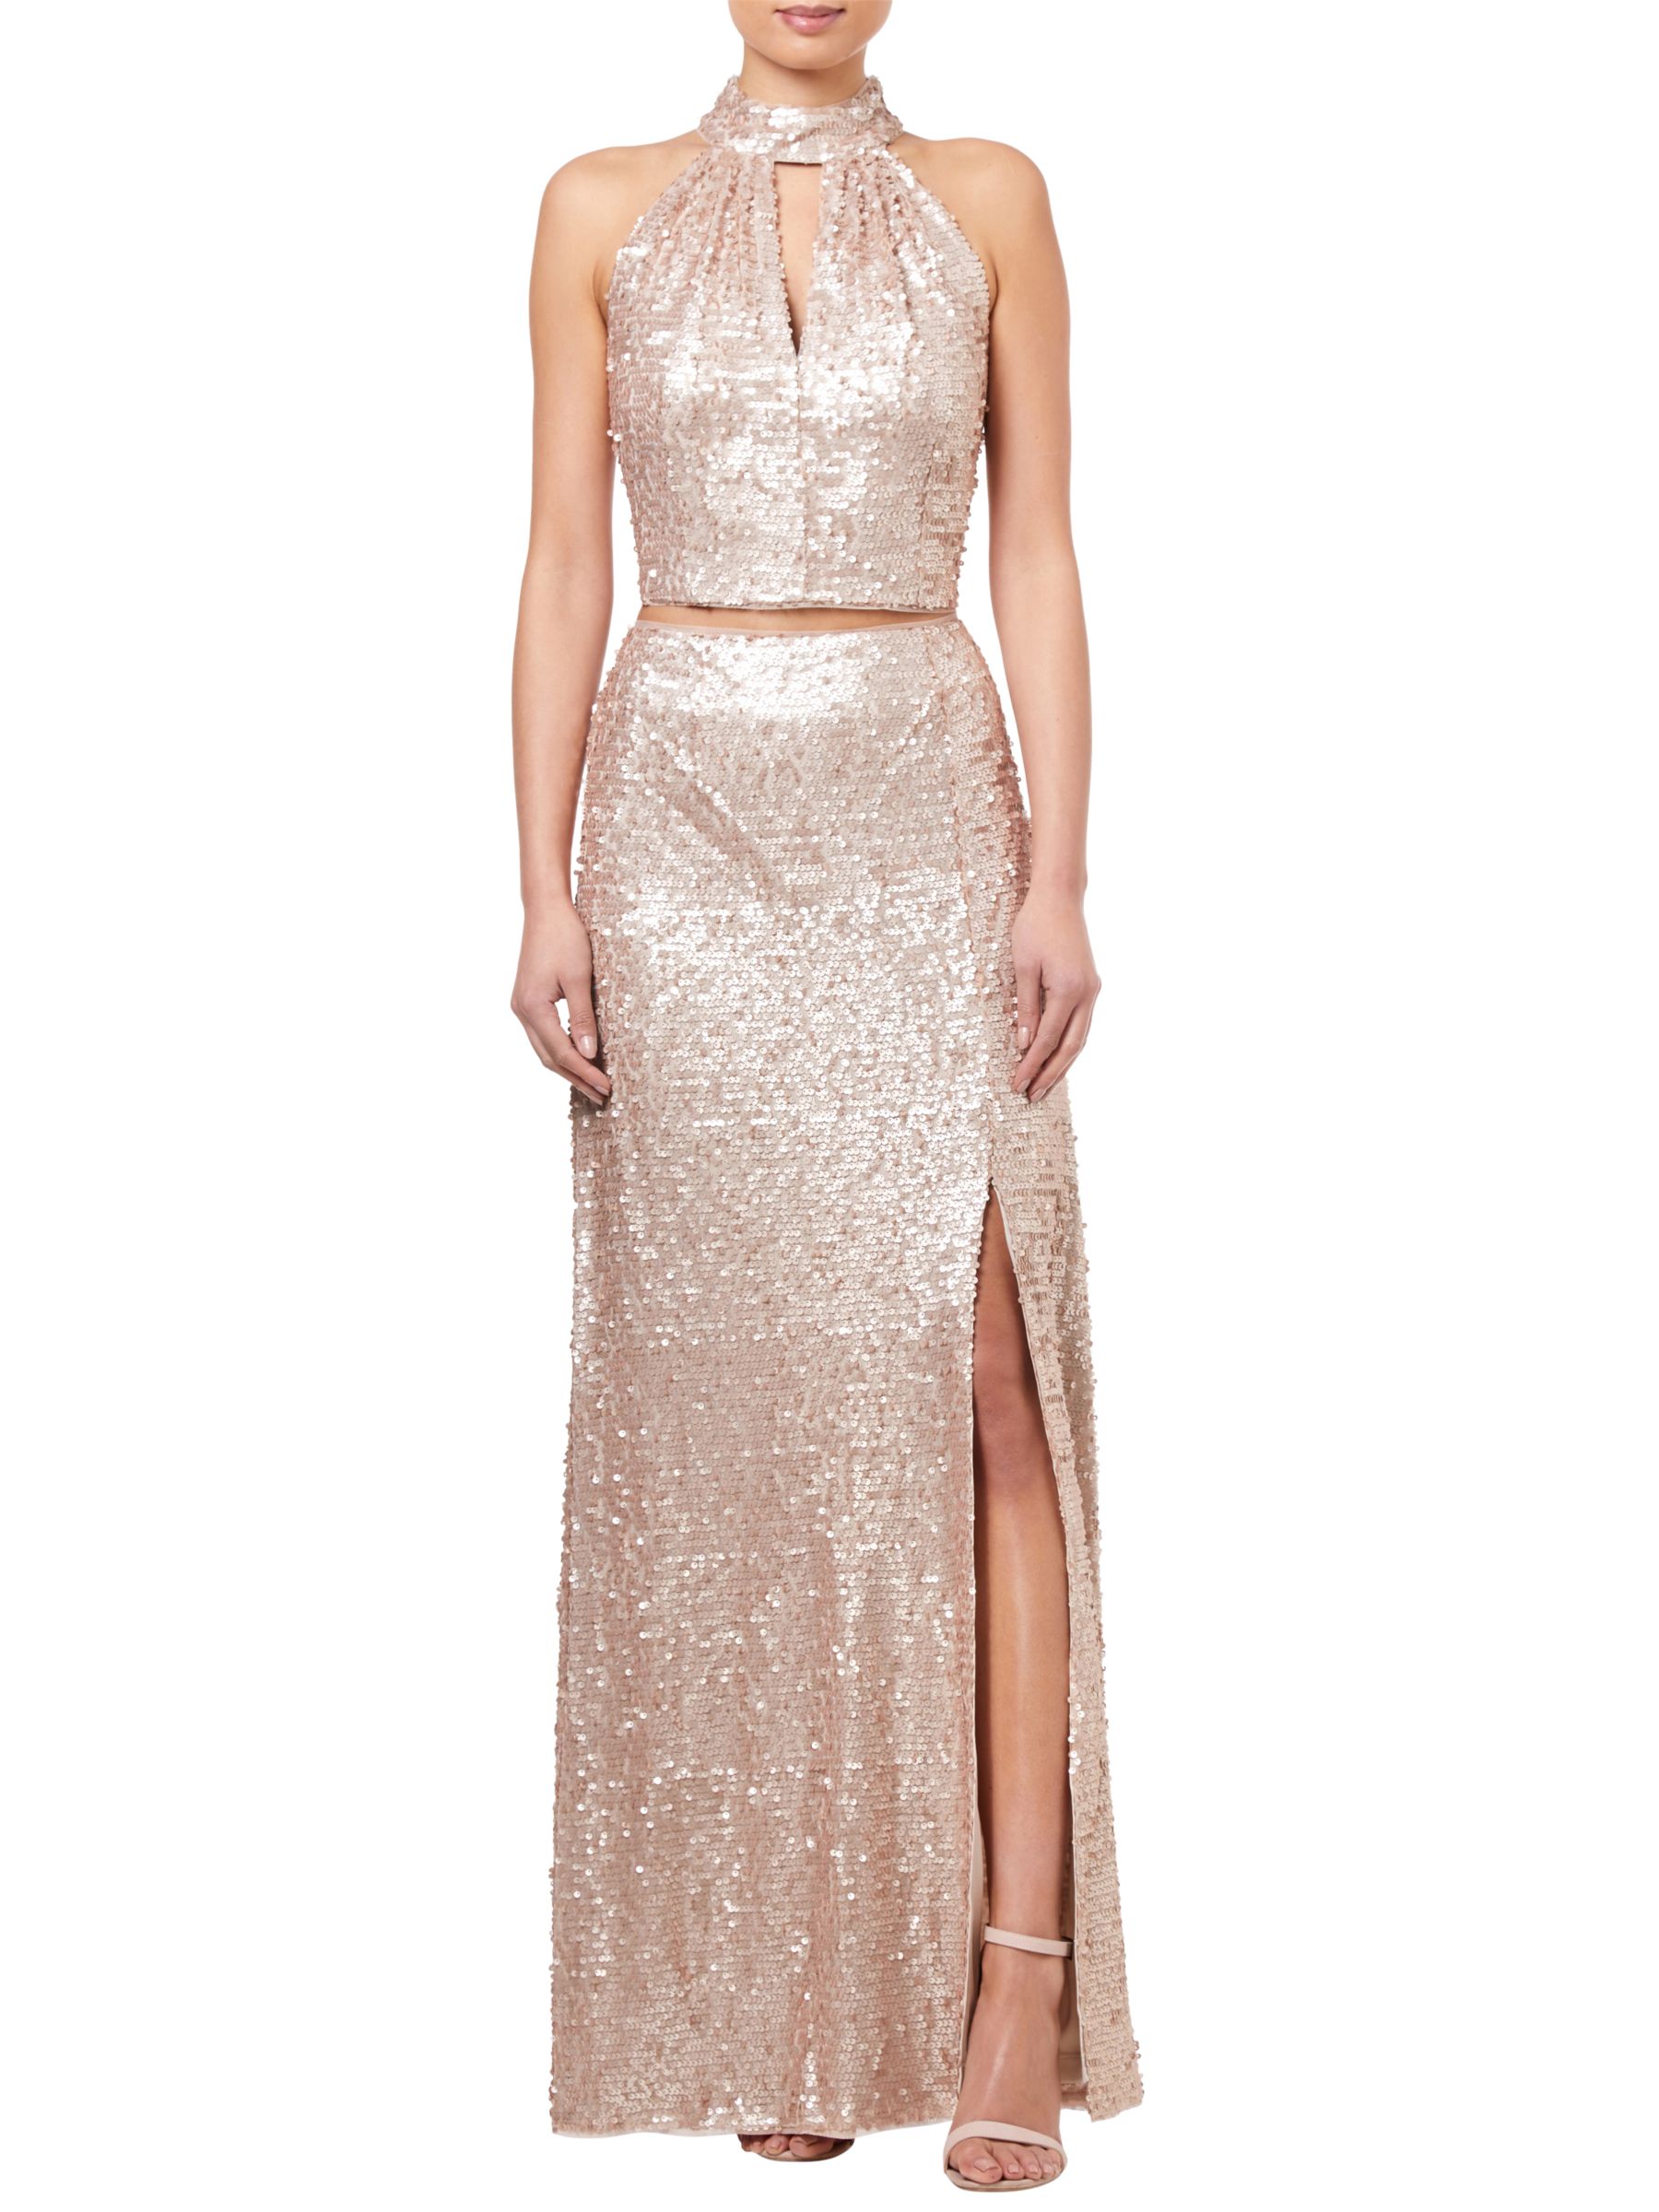 Adrianna Papell Two Piece Dress, Nude